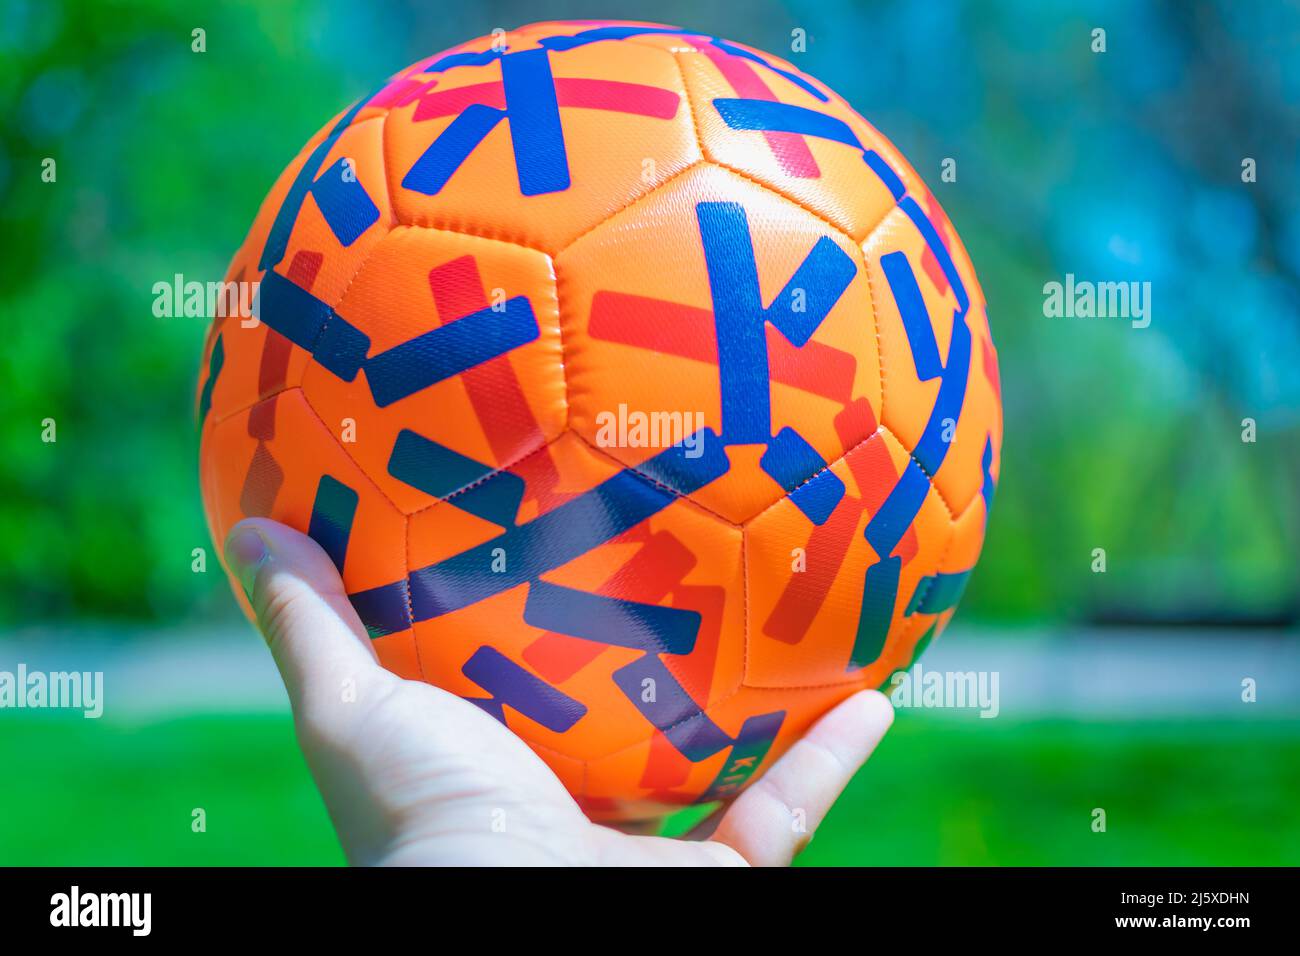 Colorful Football on grass Qatar World Cup 2022 Concept close-up Stock Photo